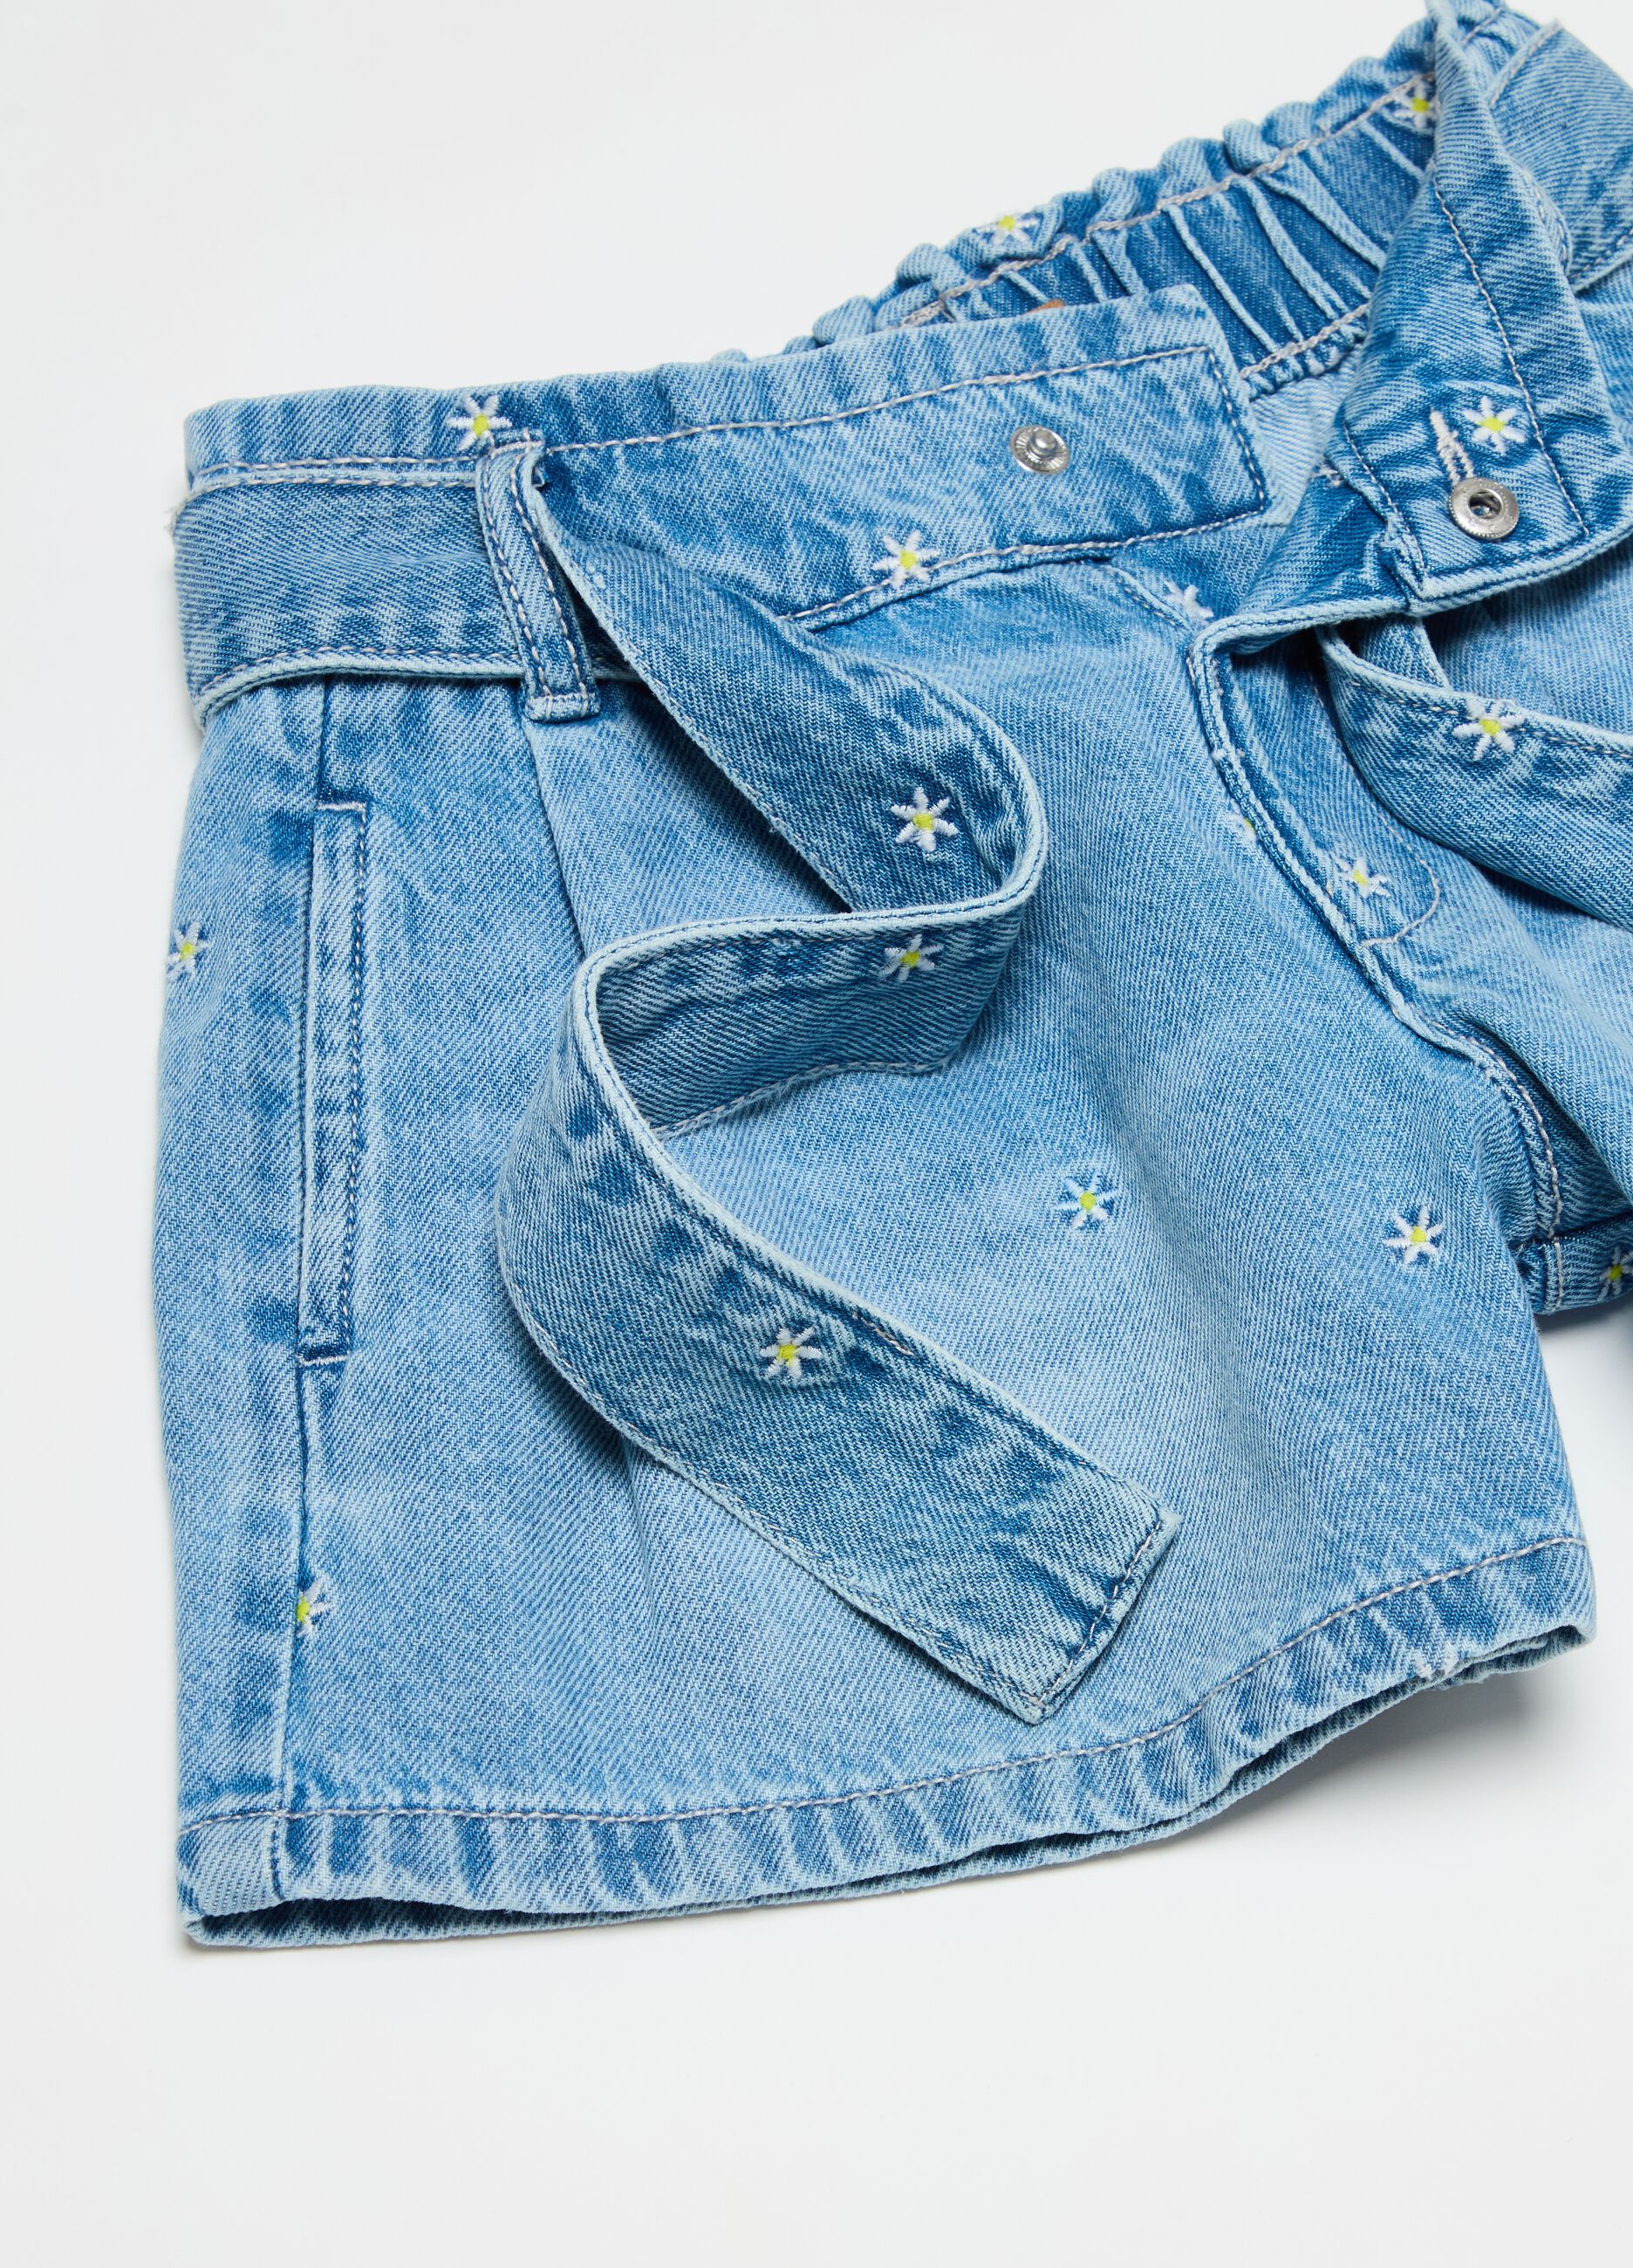 Denim shorts with small flowers embroidery